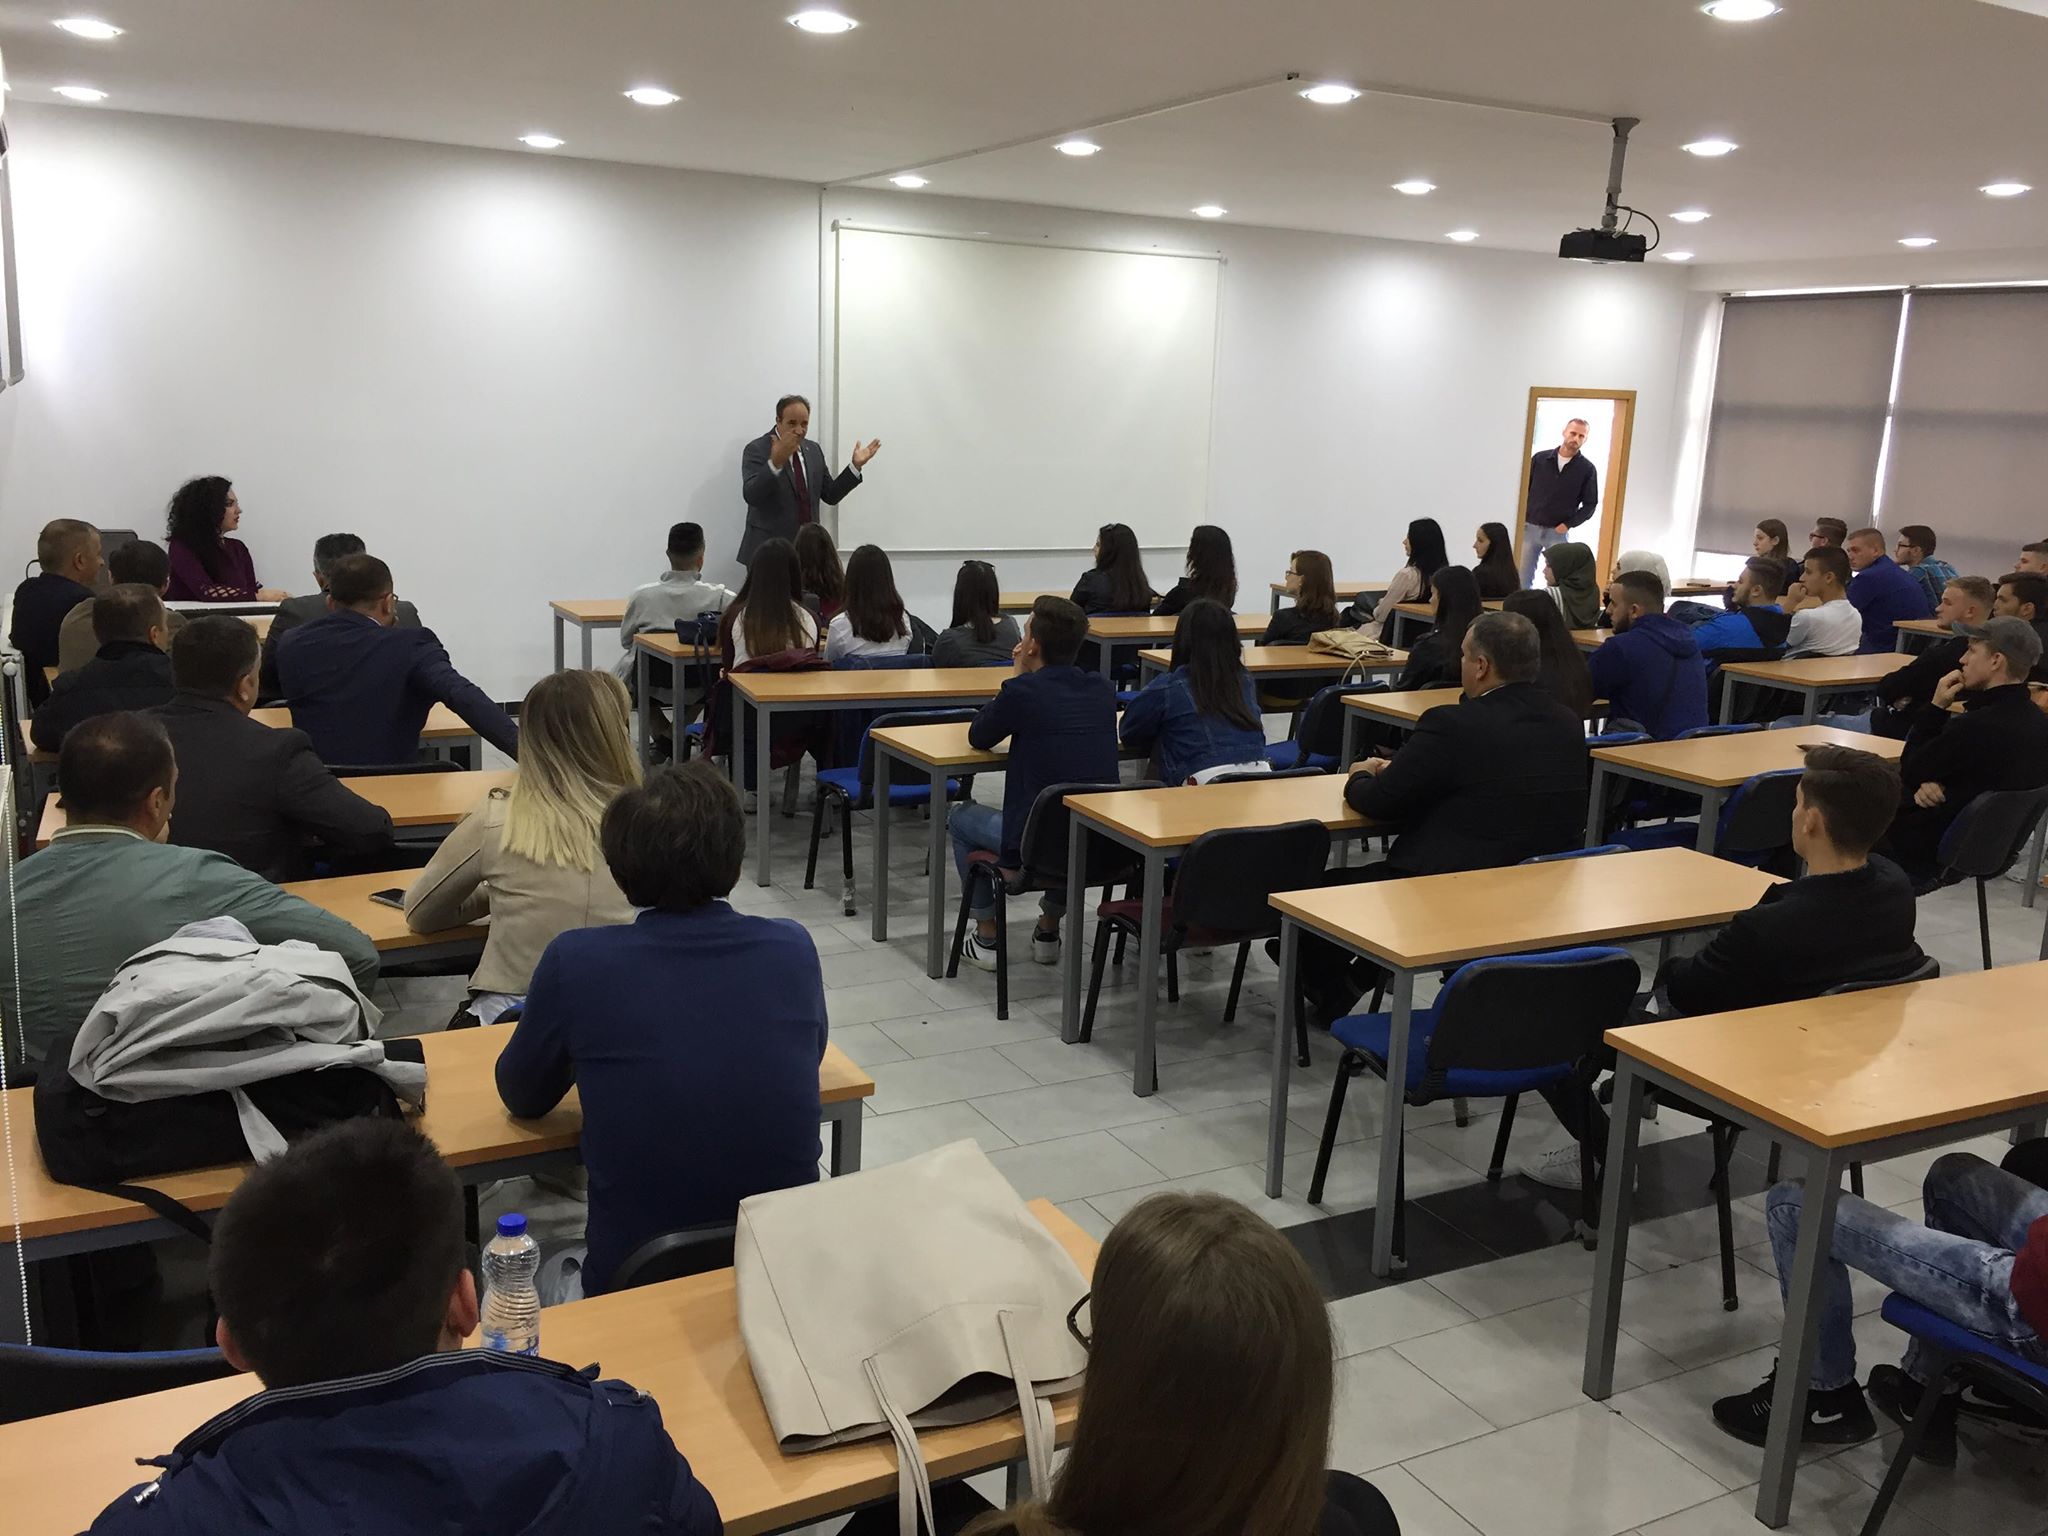 UBT has solemnly welcomed the new students in Prizren and Peja